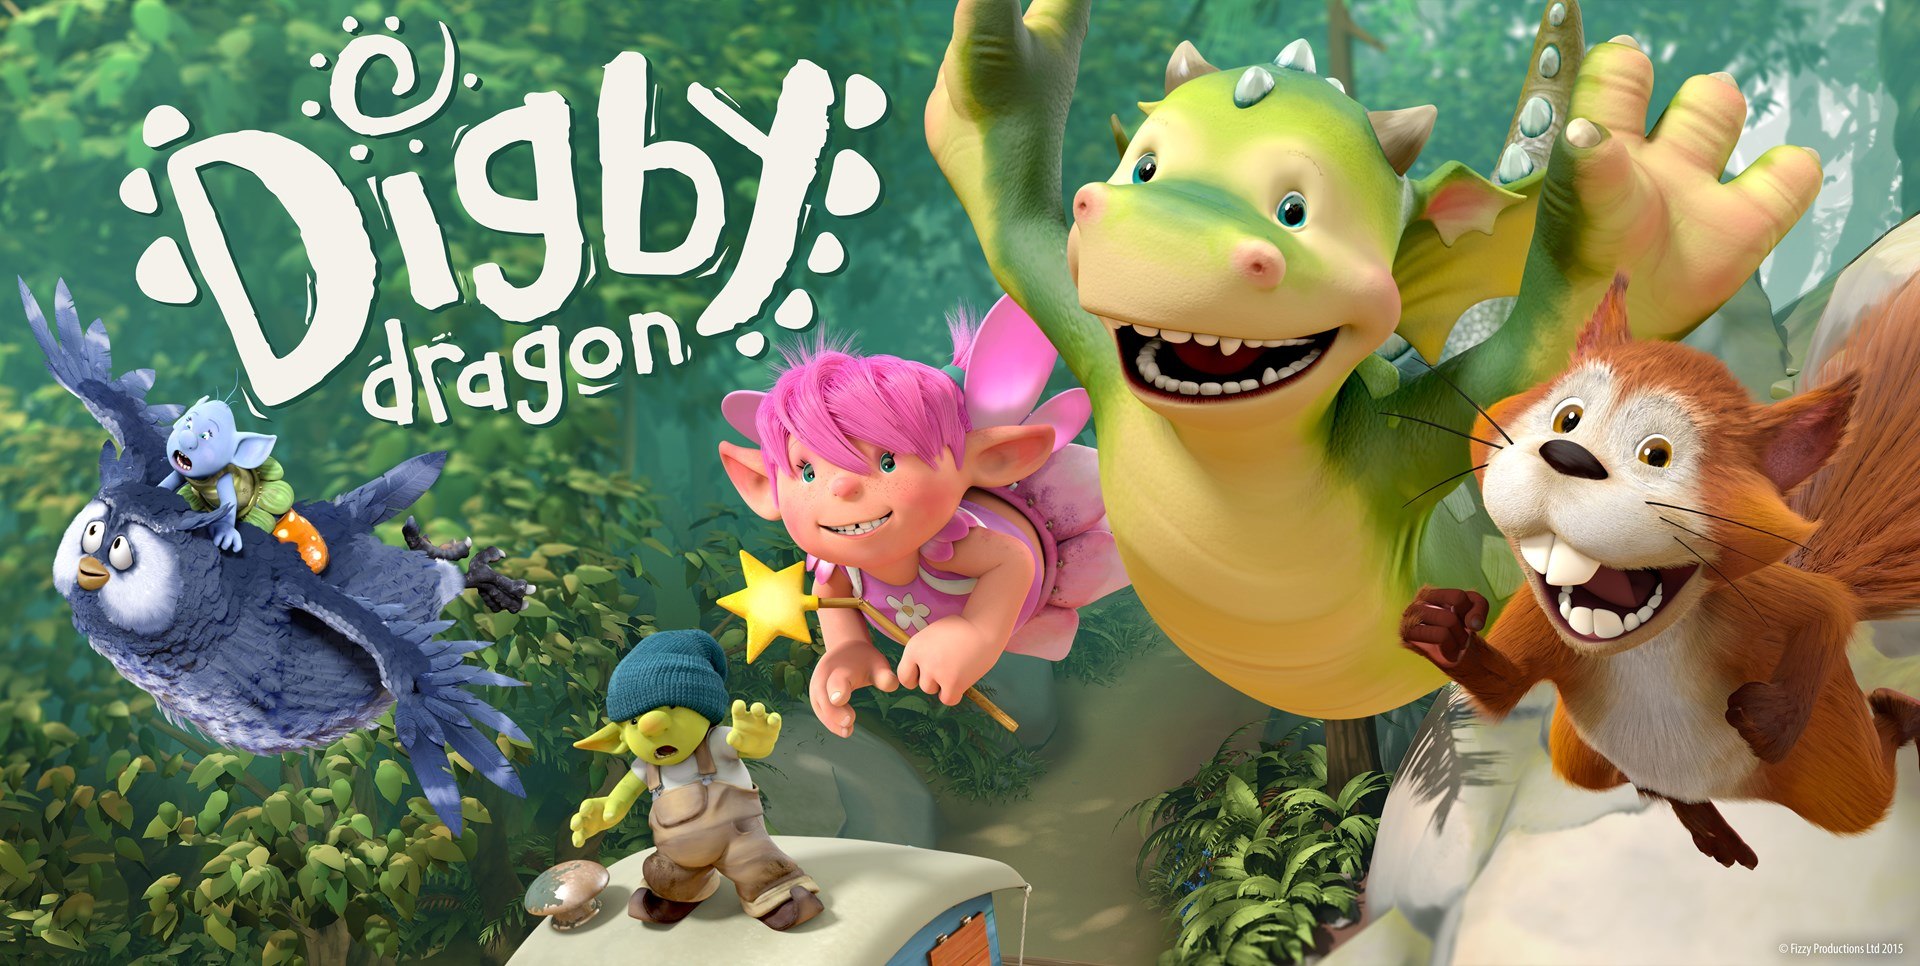 Blue Zoo Set for Second Season of 'Digby Dragon' | Animation World Network